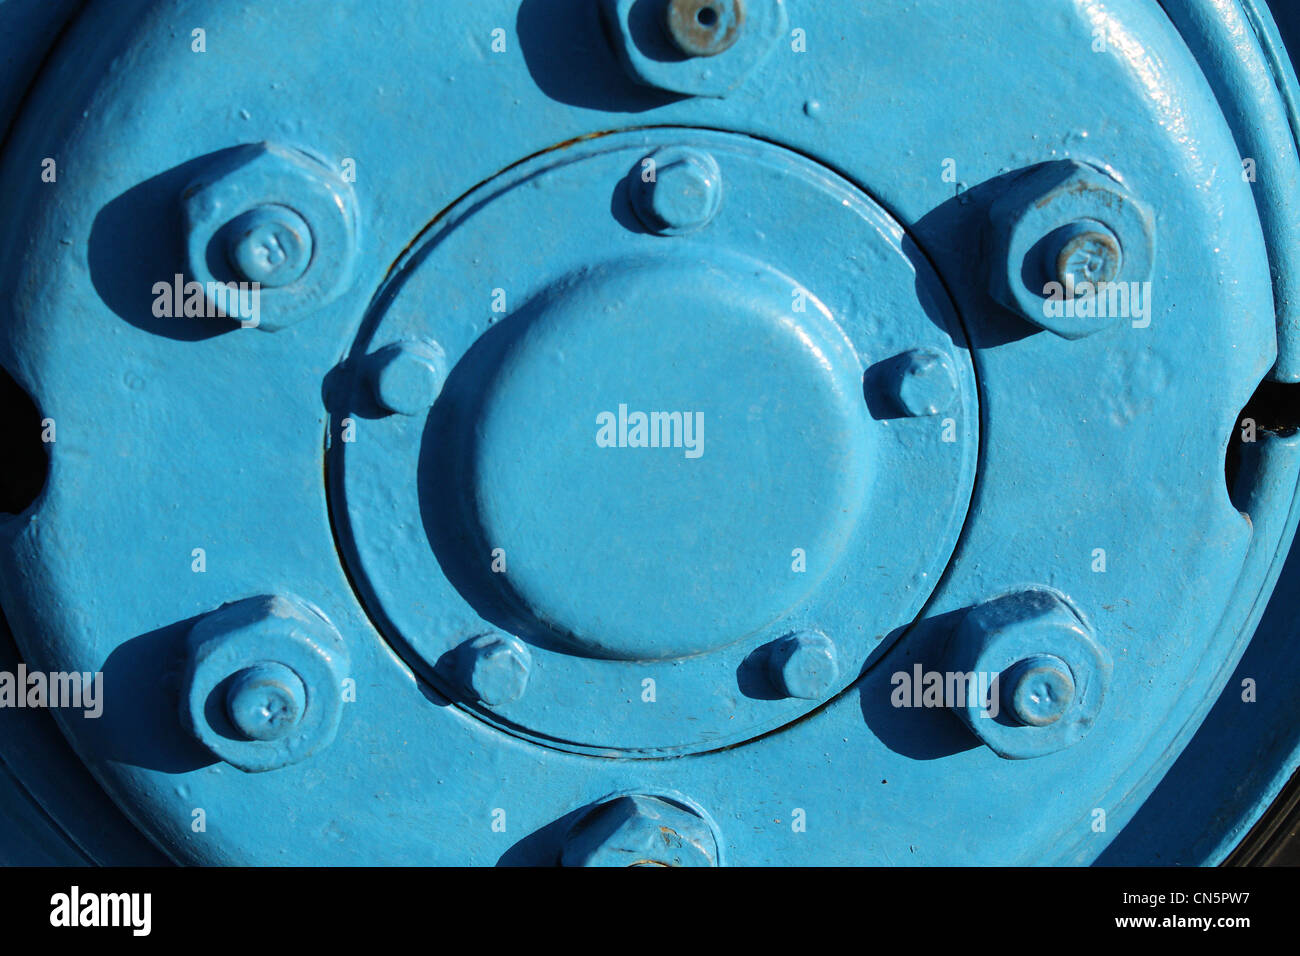 A Close-up of the wheel of a truck of a vivid light blue color. Stock Photo